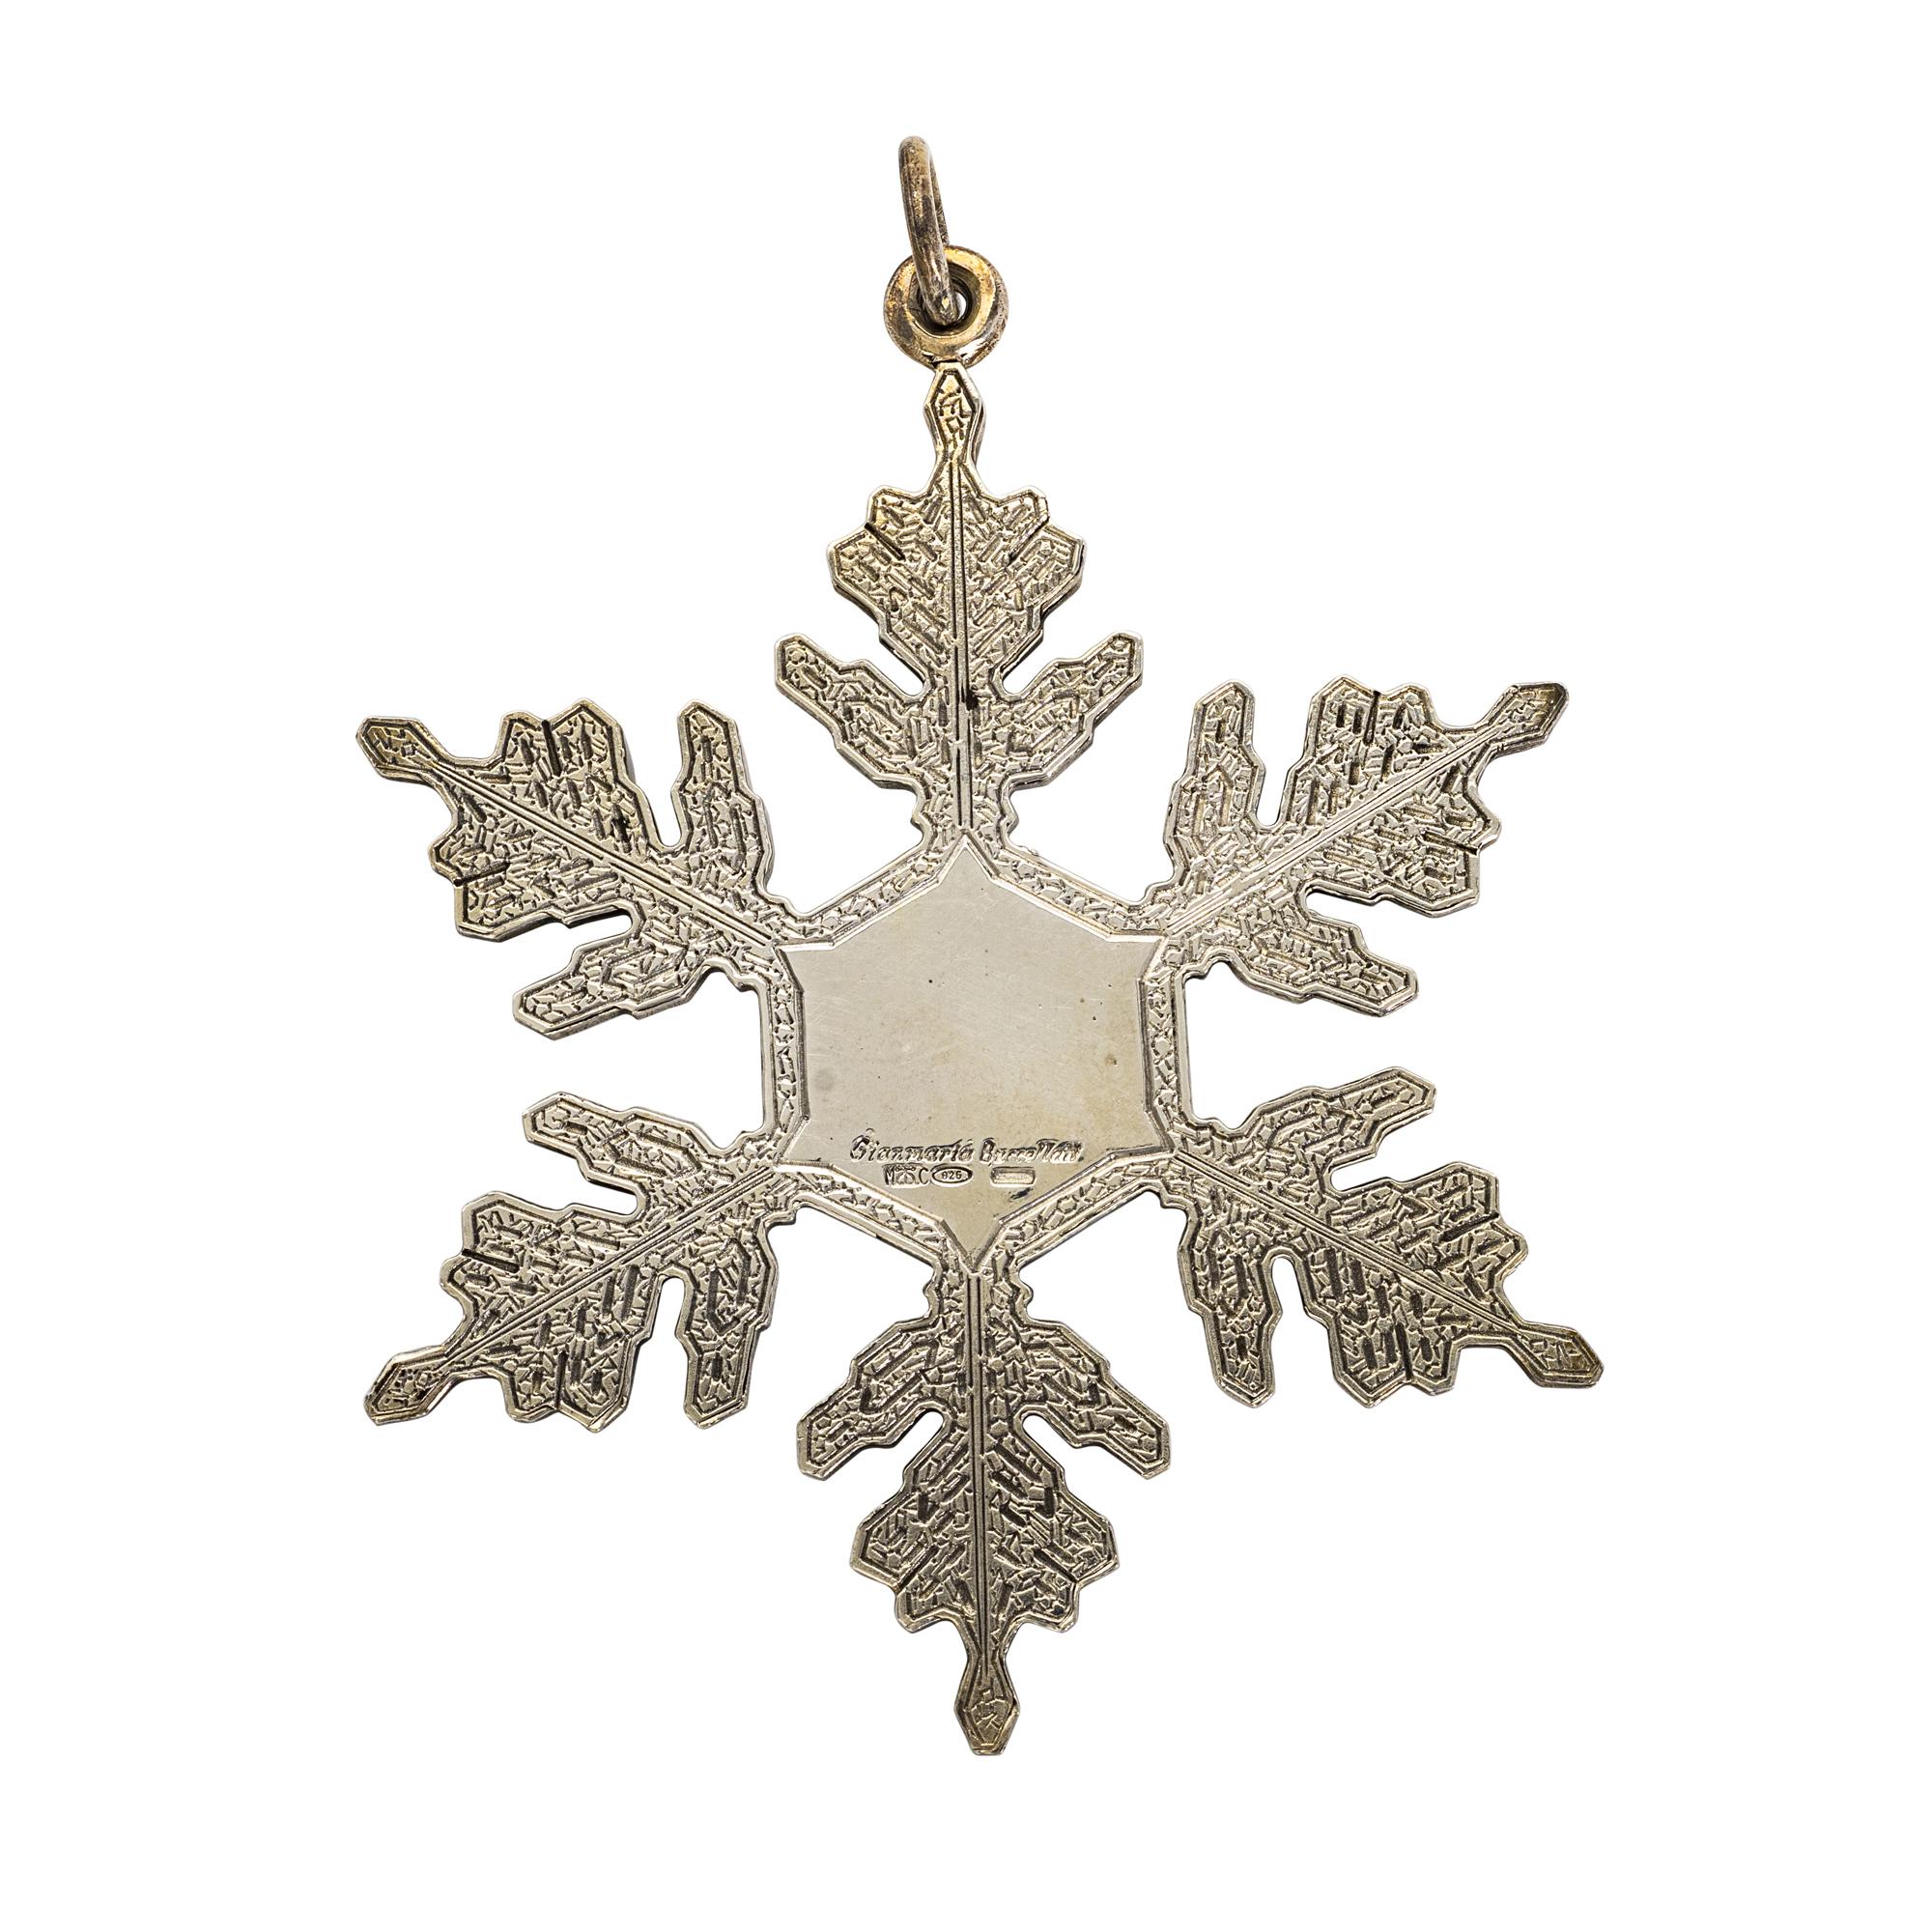 
An Italian silver snowflake, Gianmaria Buccellati, Bologna, late 20th century
marked on undersides Gianmaria Buccellati, initialed maker's mark and factory code 
Length 3.5 in. (8.89 cm.), 
2.5 oz
3266 g